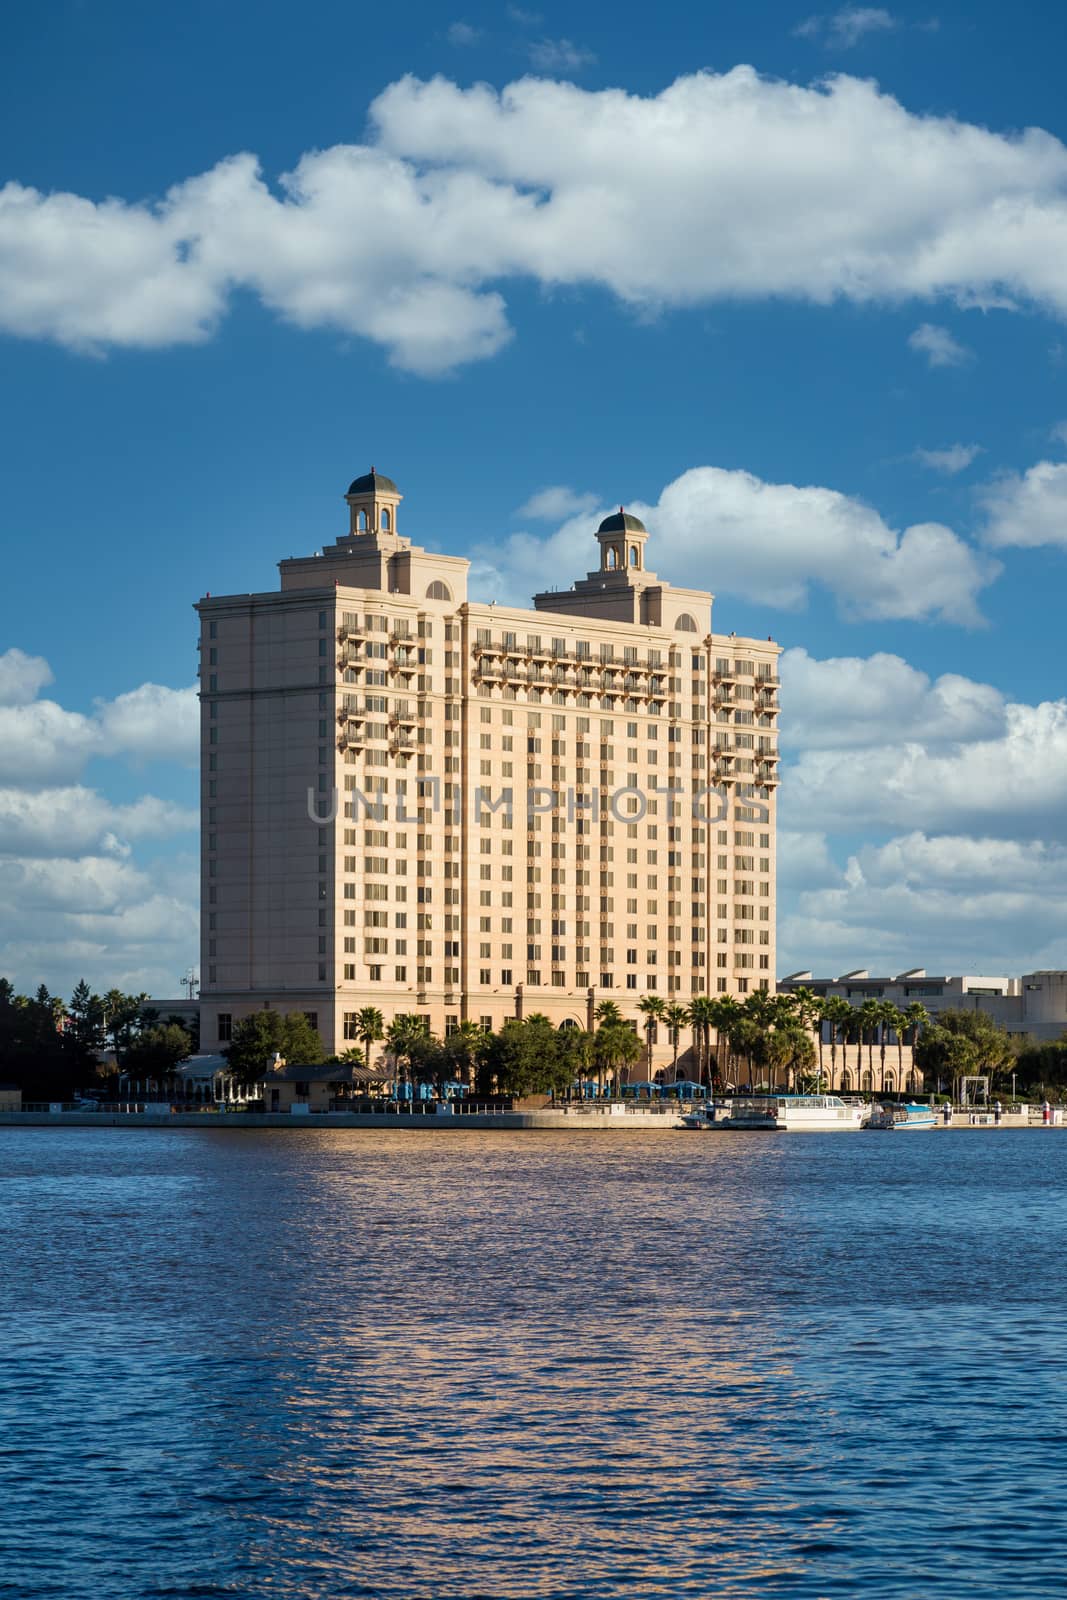 A modern hotel and convention center on the bank of the Savannah River in Georgia